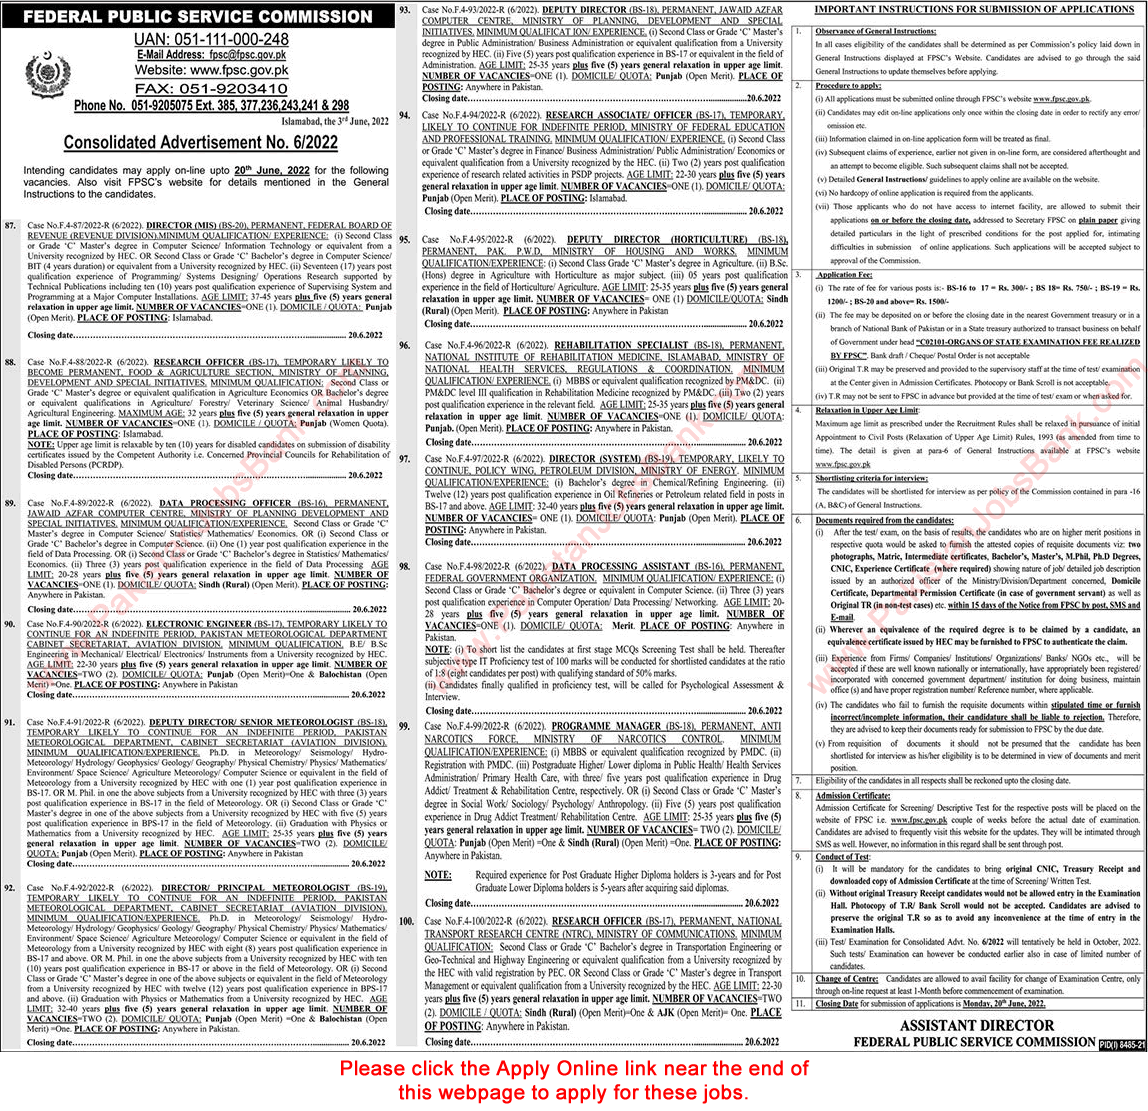 FPSC Jobs June 2022 Apply Online Consolidated Advertisement No 06/2022 6/2022 Latest